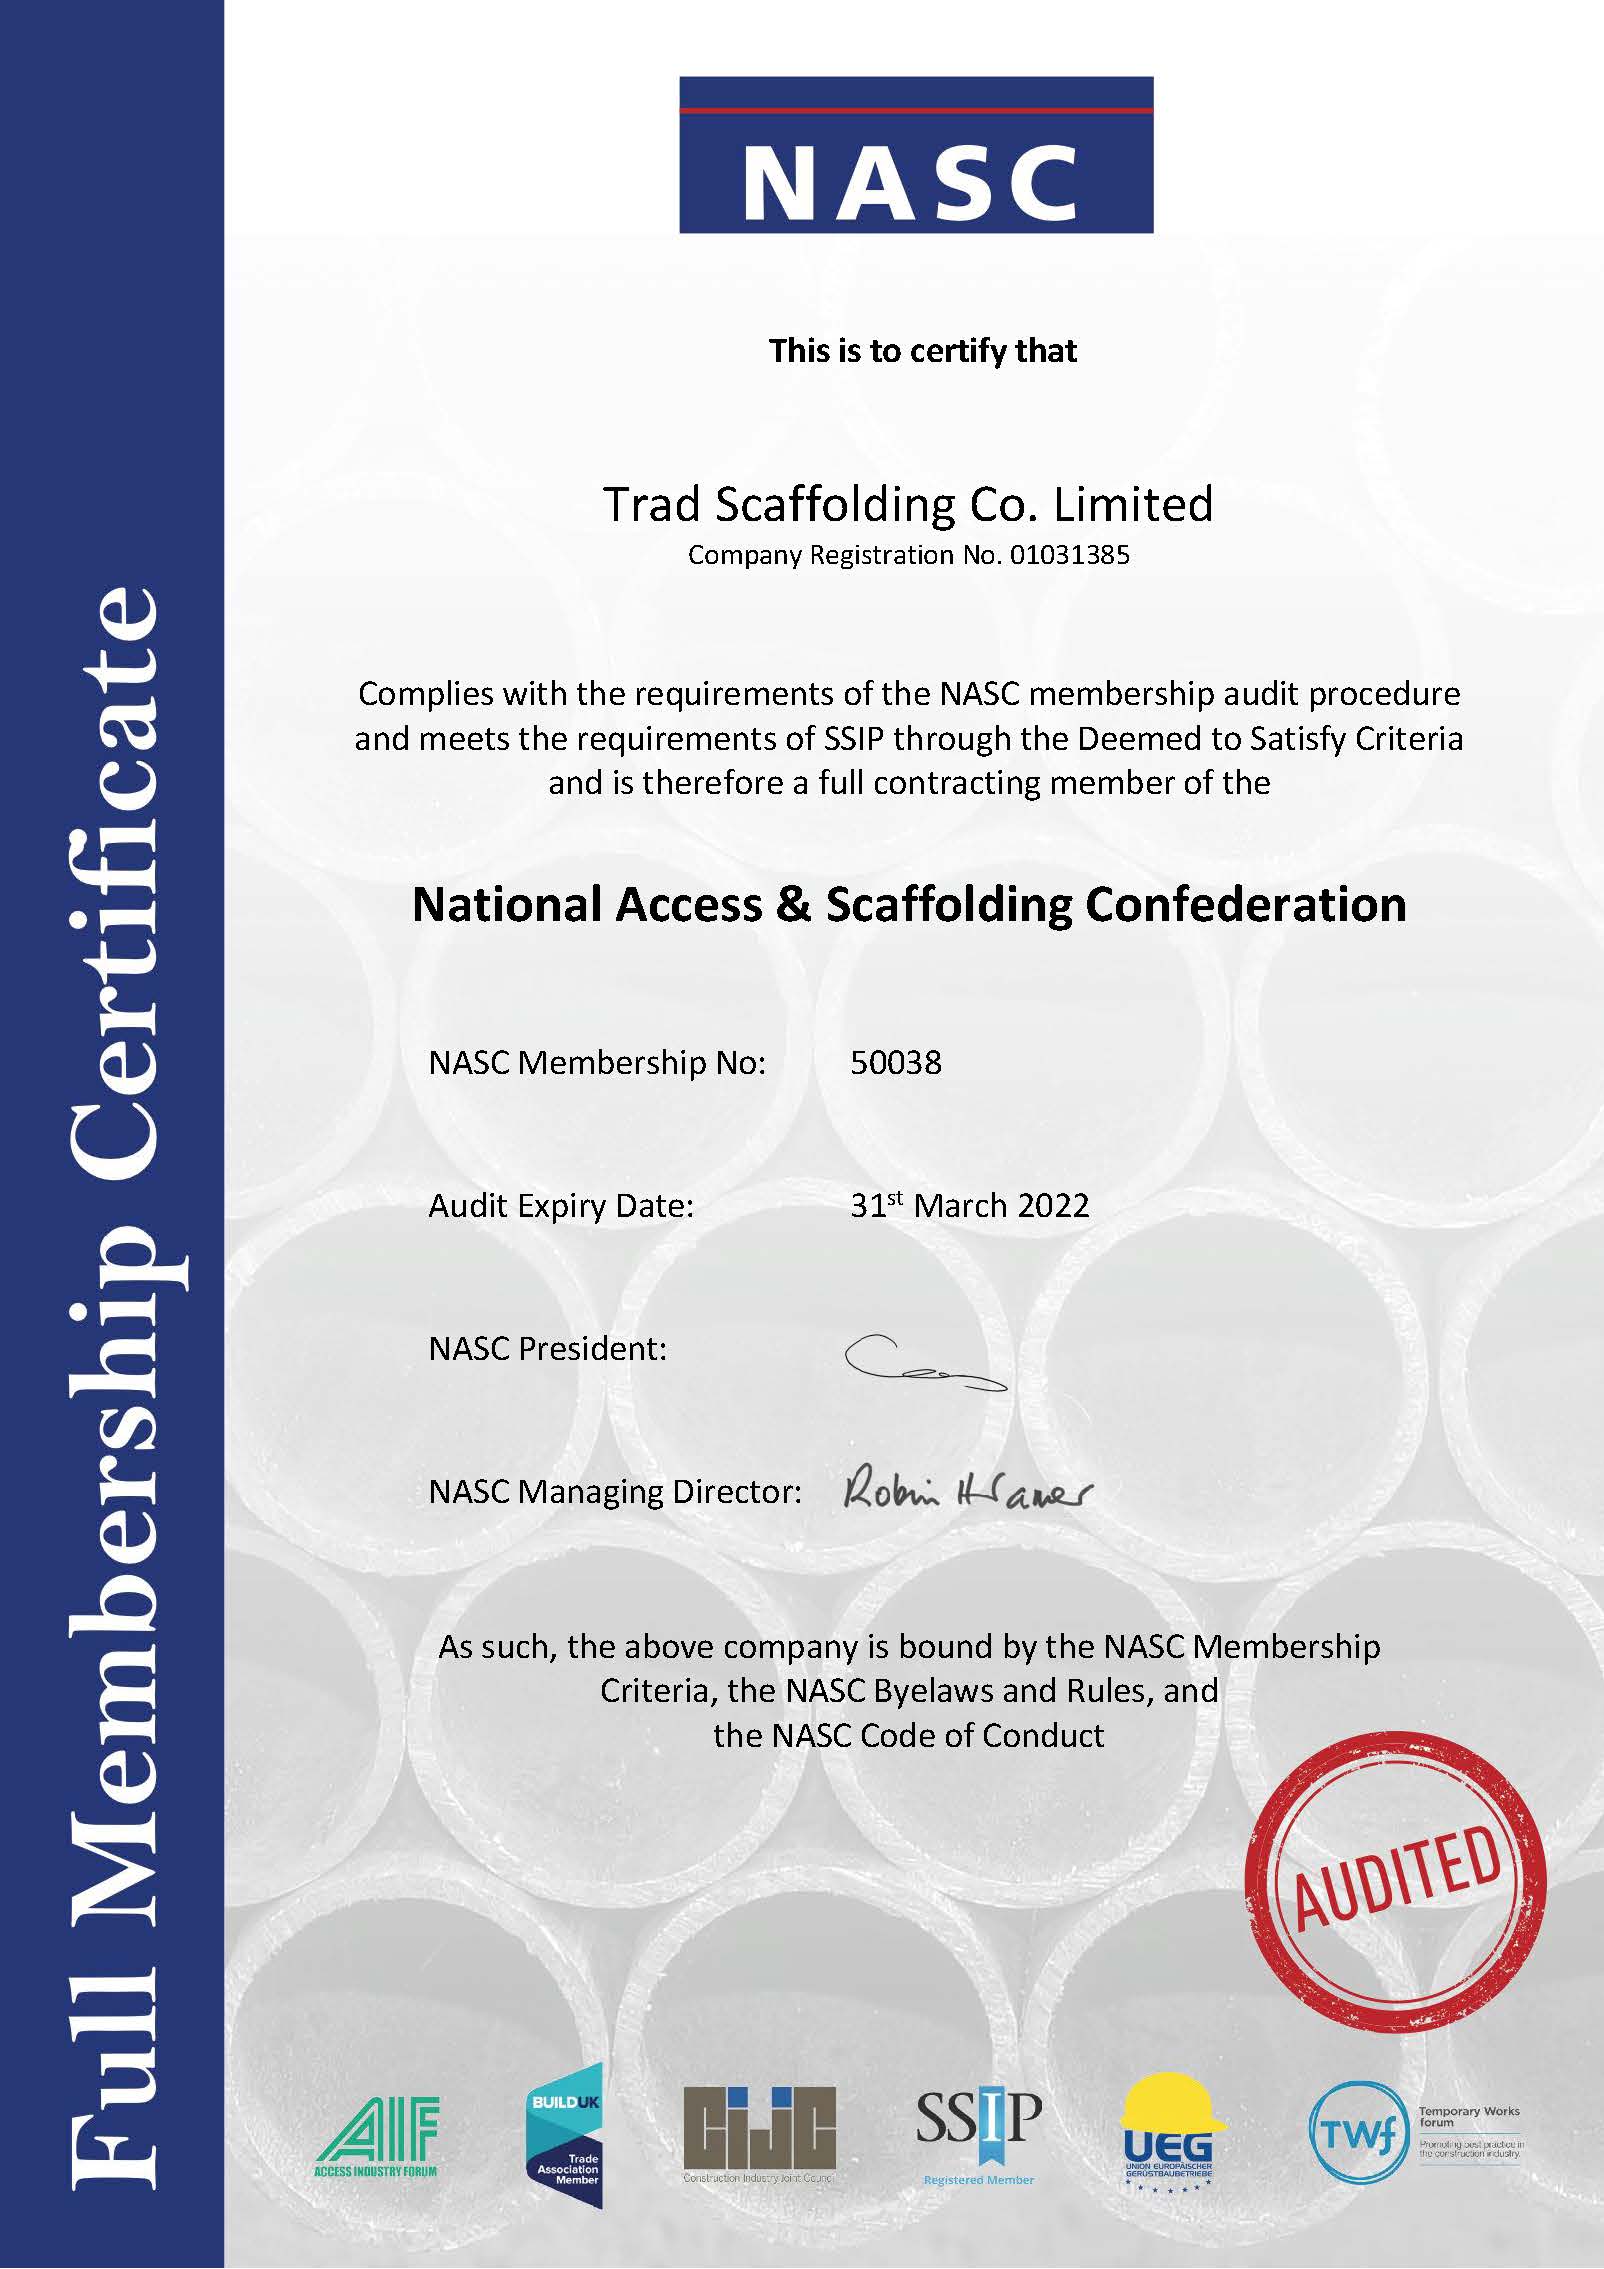 National Association and Scaffolding Confederation